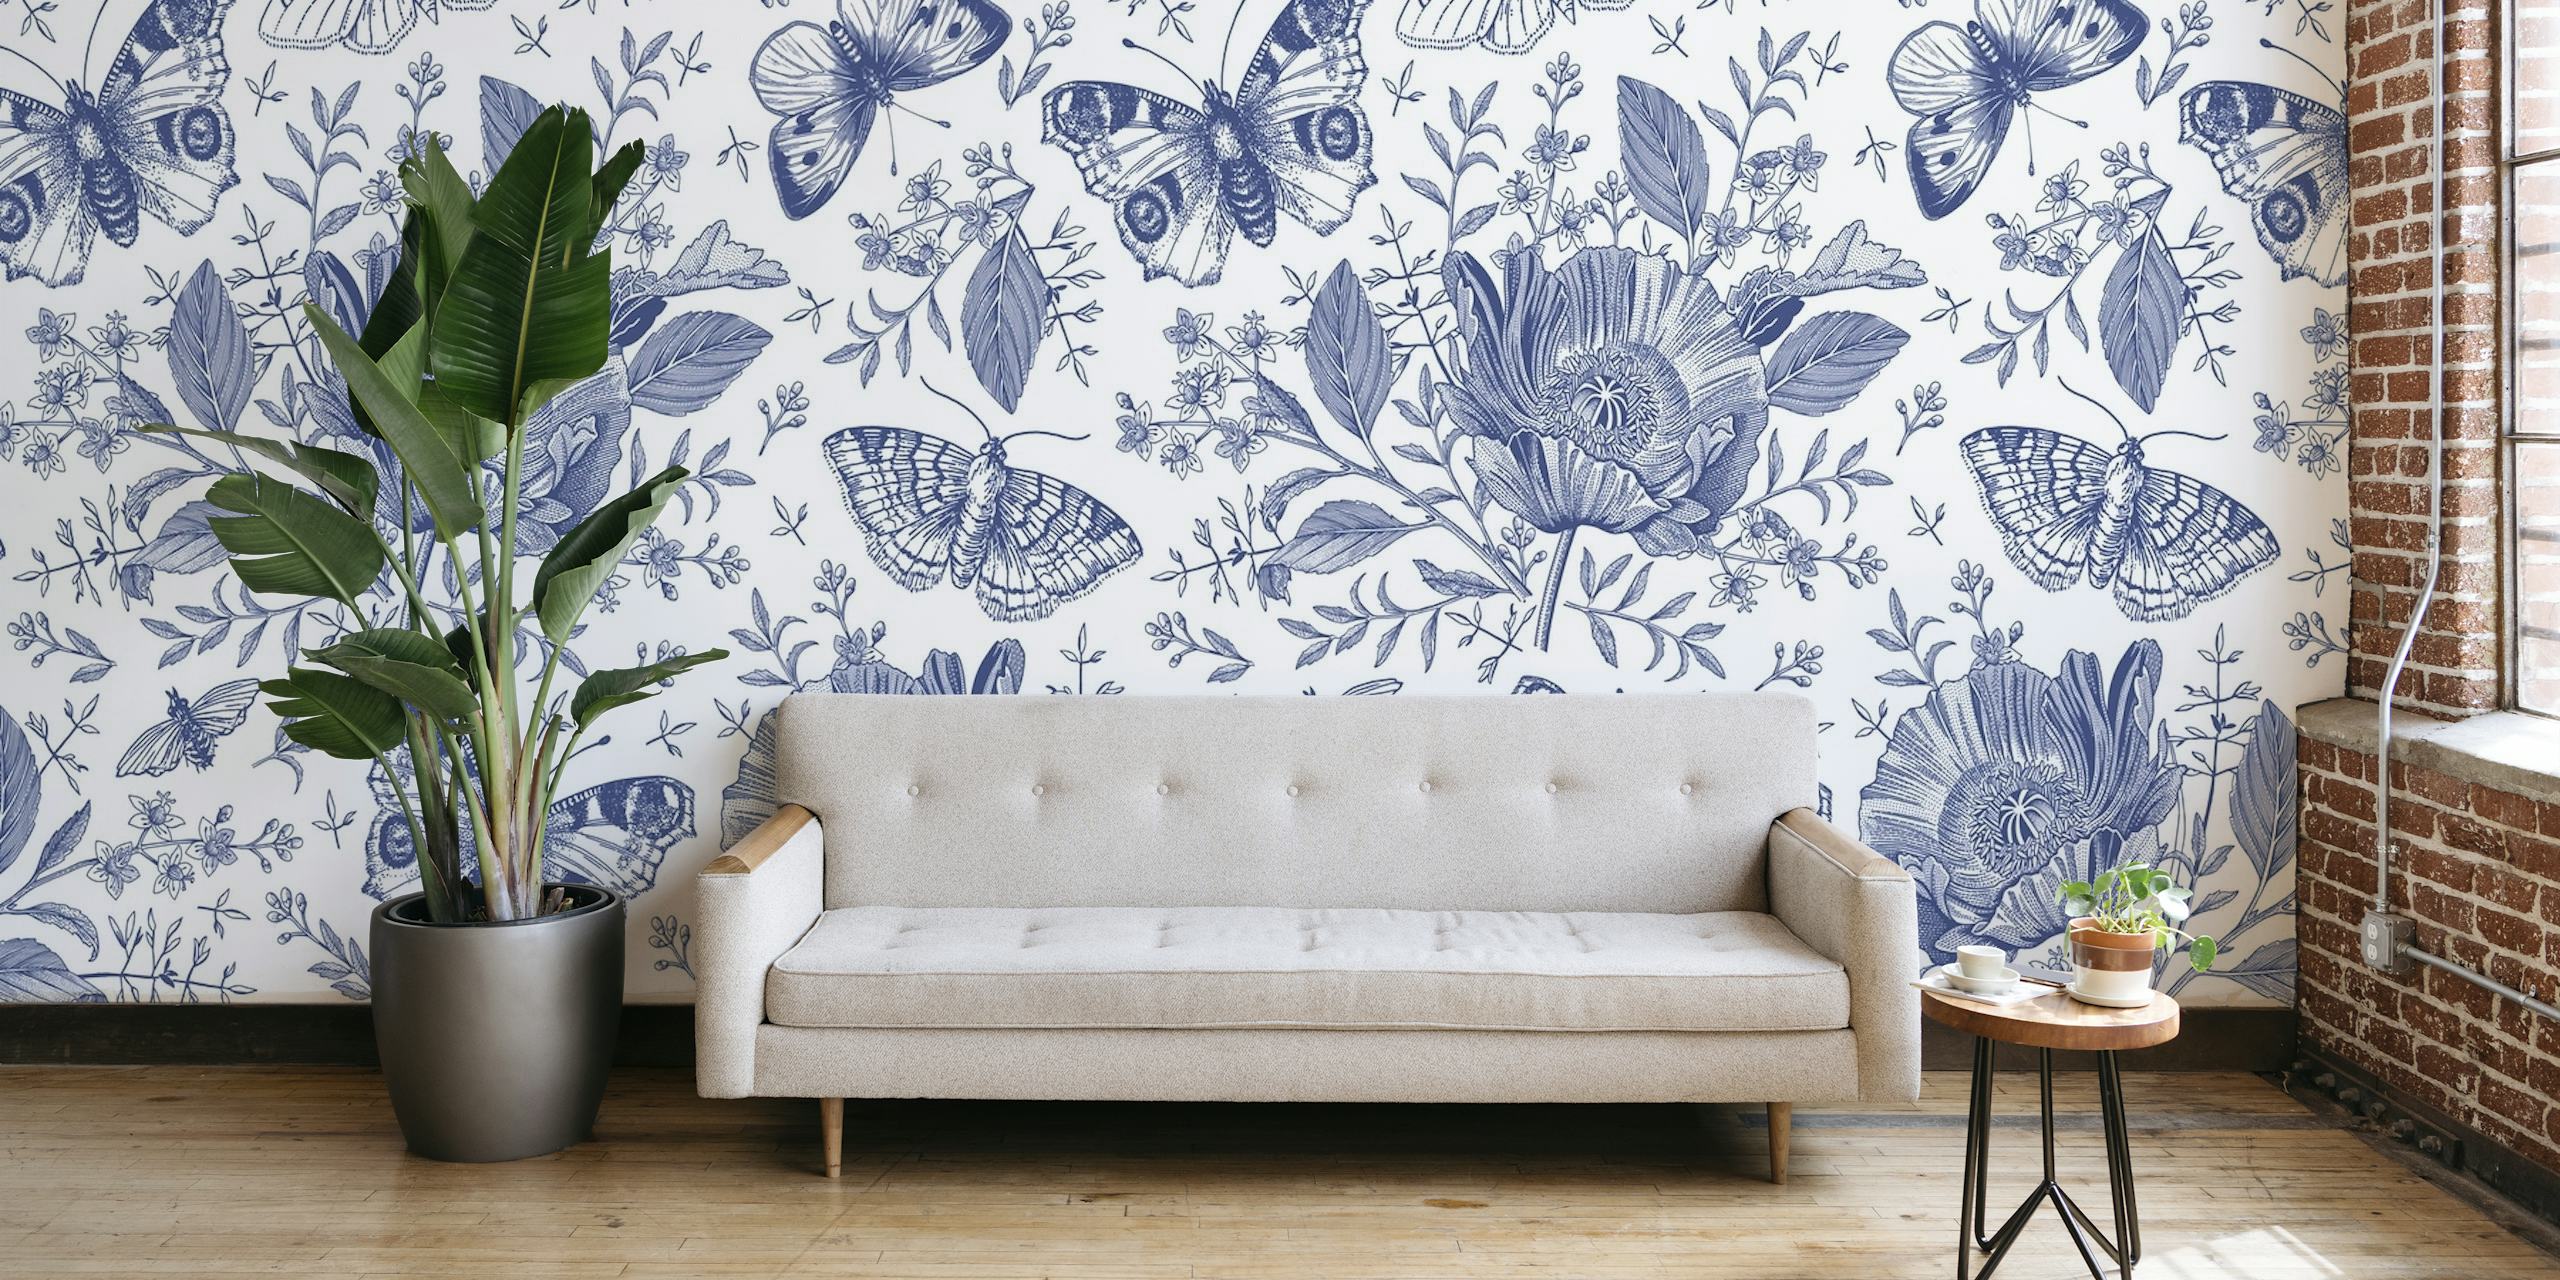 Blue botanical and butterfly pattern wall mural from happywall.com